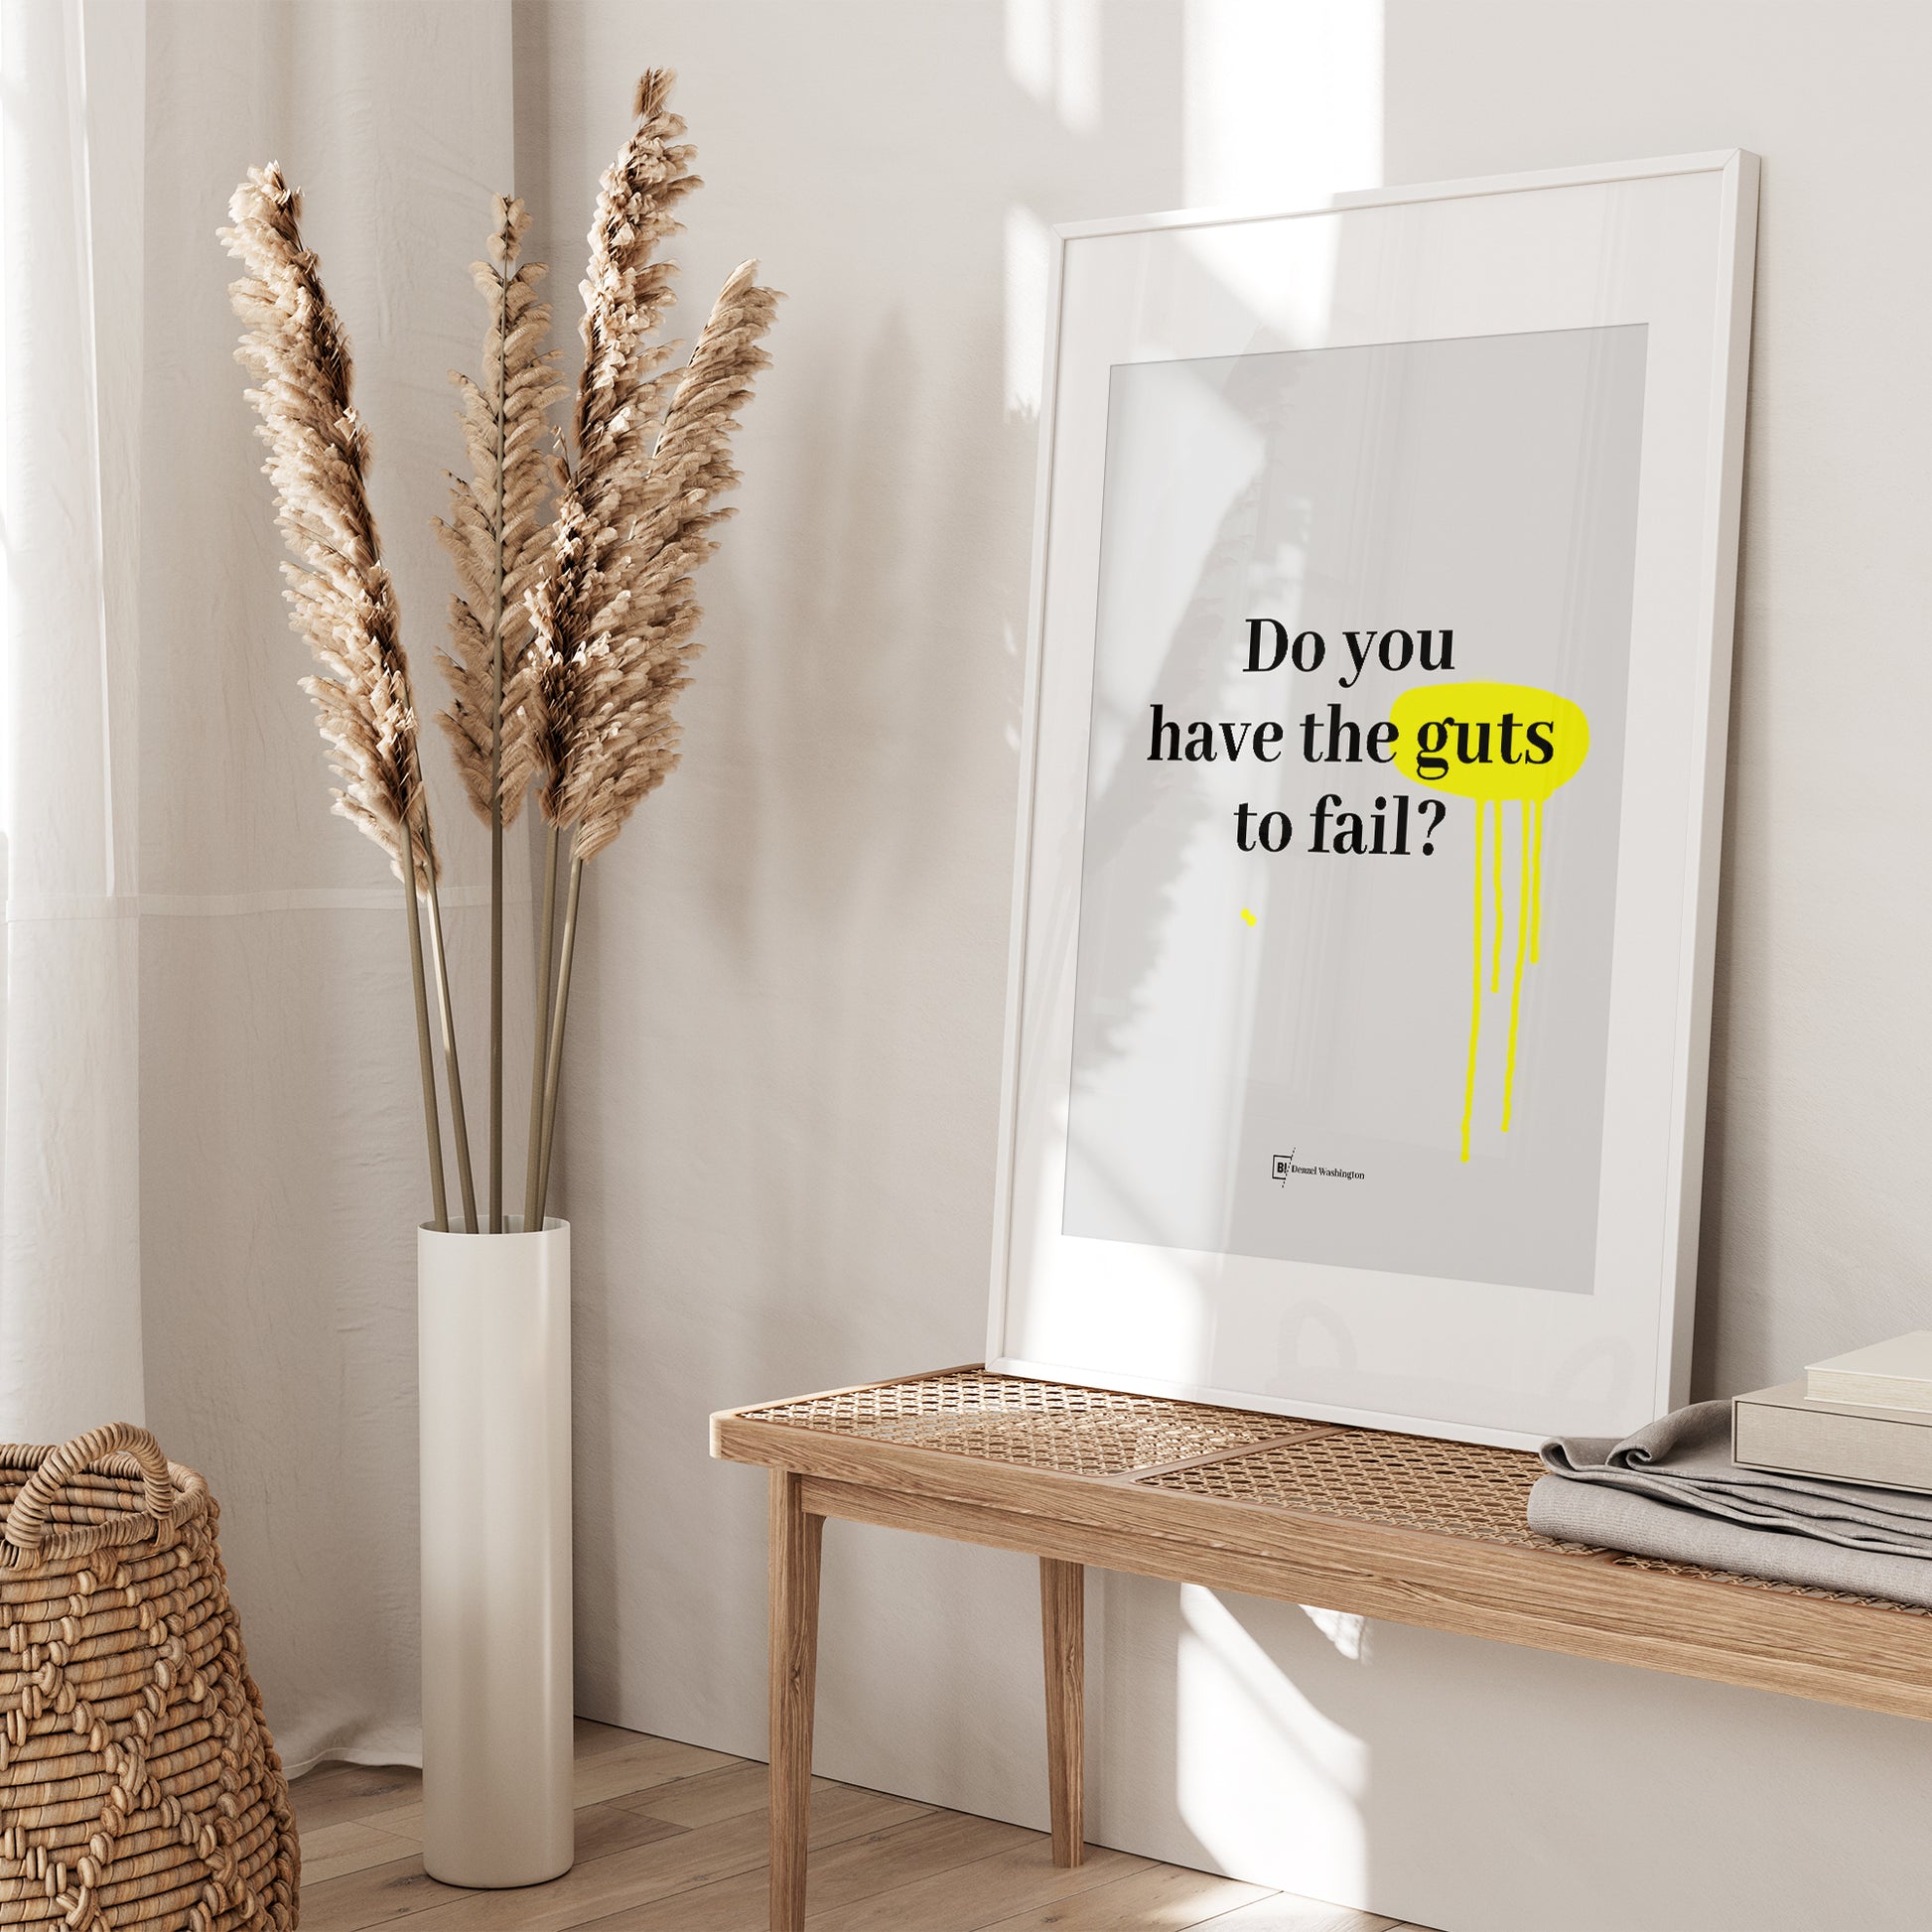 Be inspired by Denzel Washington's famous "Do you have the guts to fail?" quote art print. This artwork was printed using the giclée process on archival acid-free paper and is presented in a white frame with passe-partout that captures its timeless beauty in every detail.